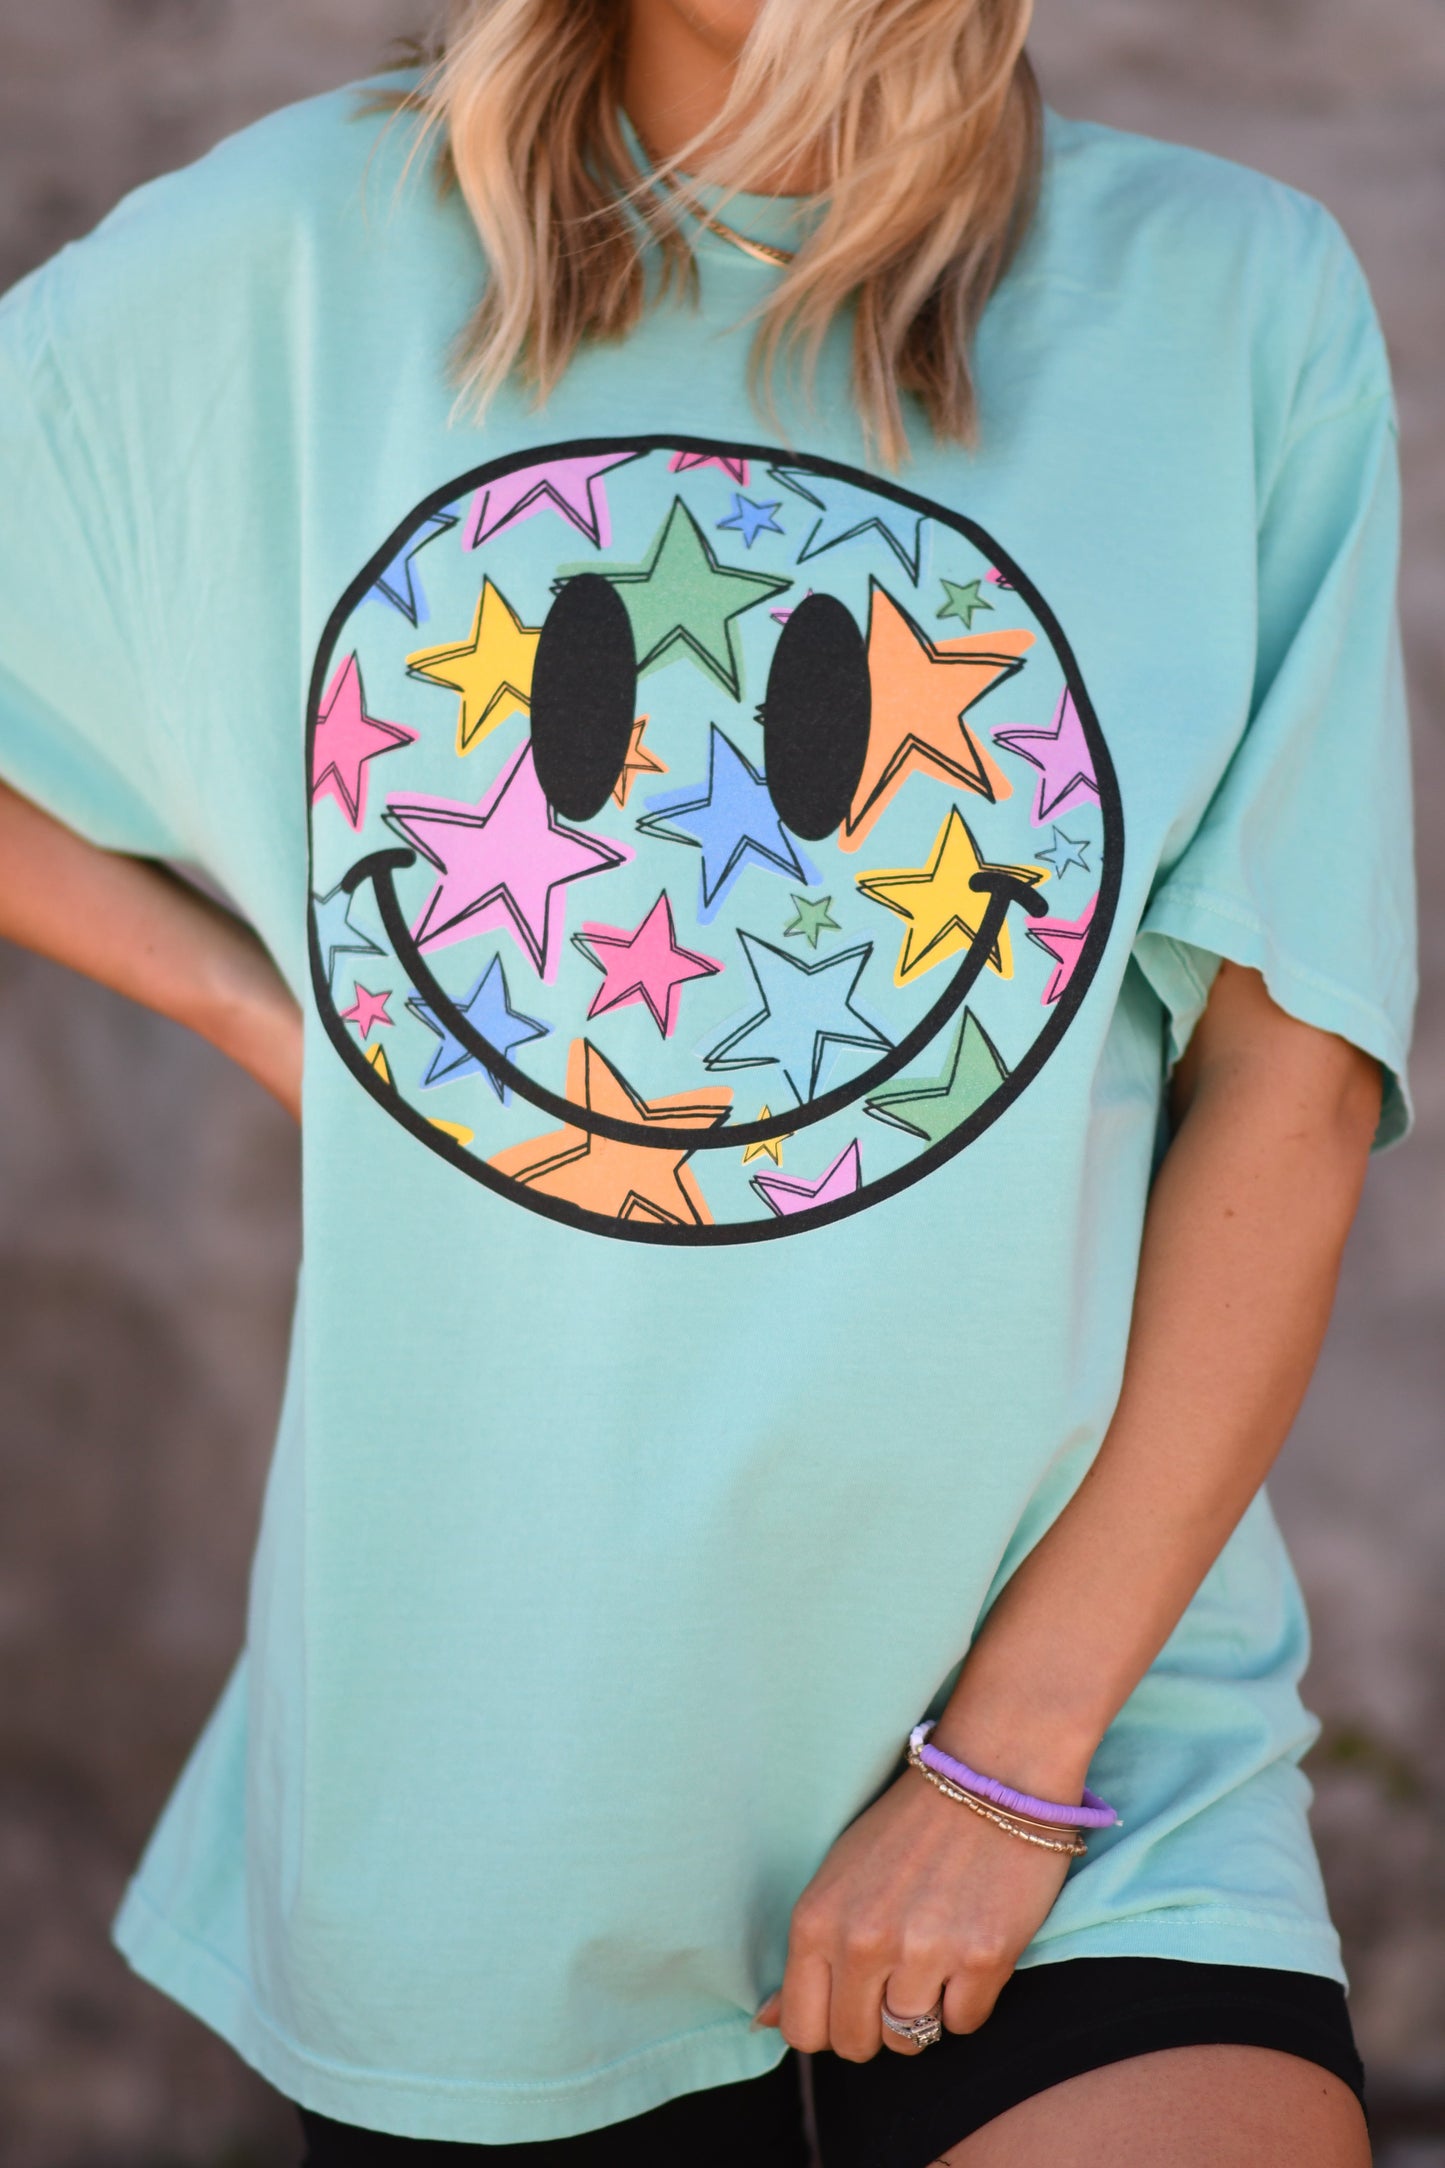 Neon Star Smiley Graphic Tee